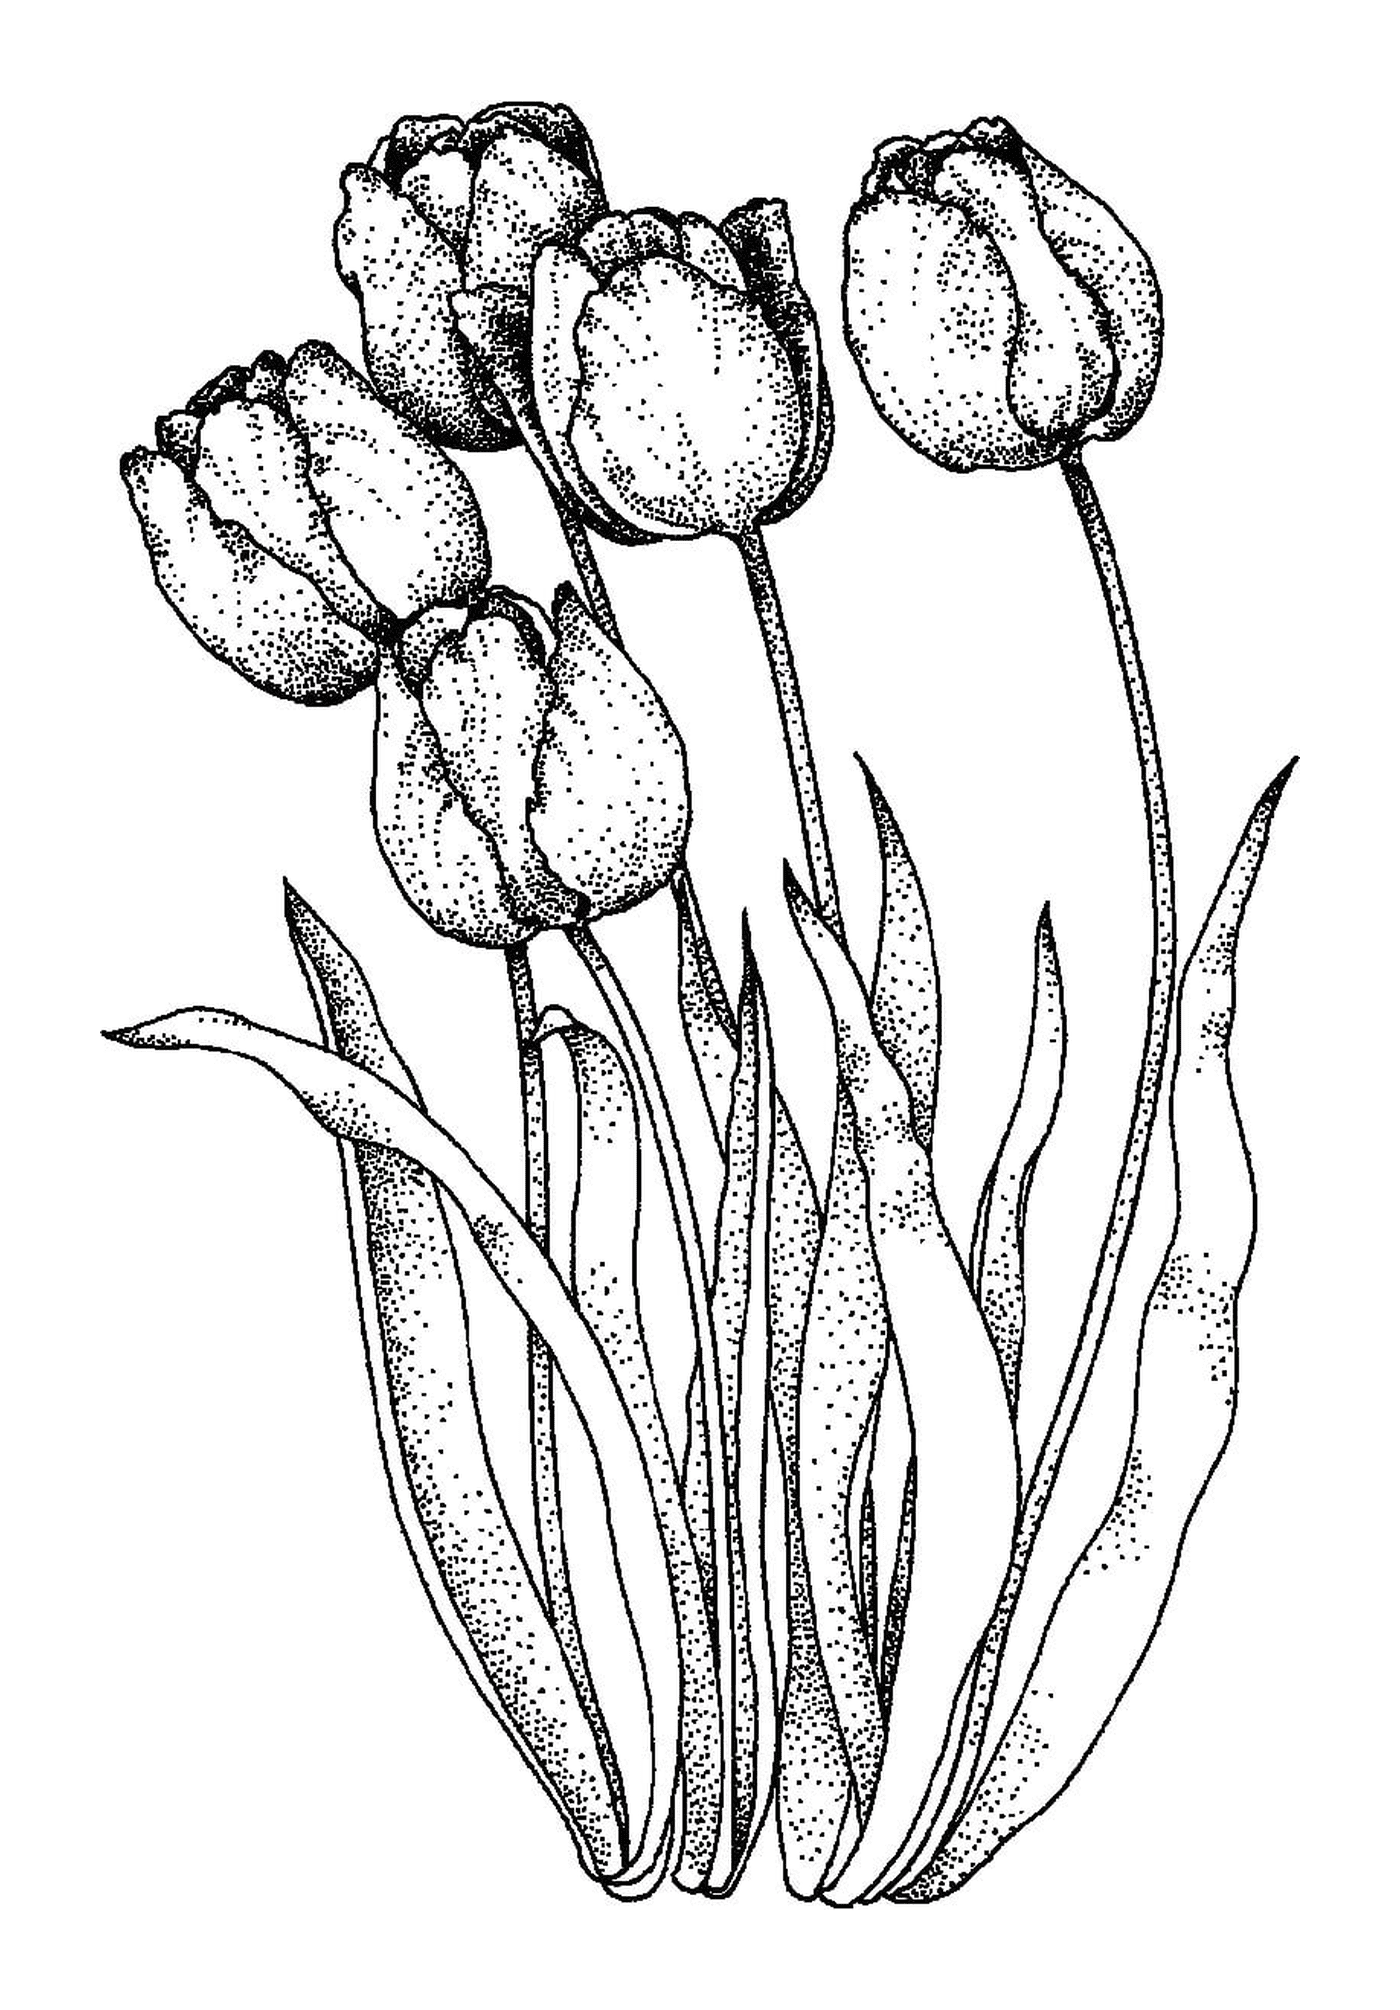  Group of flowers 